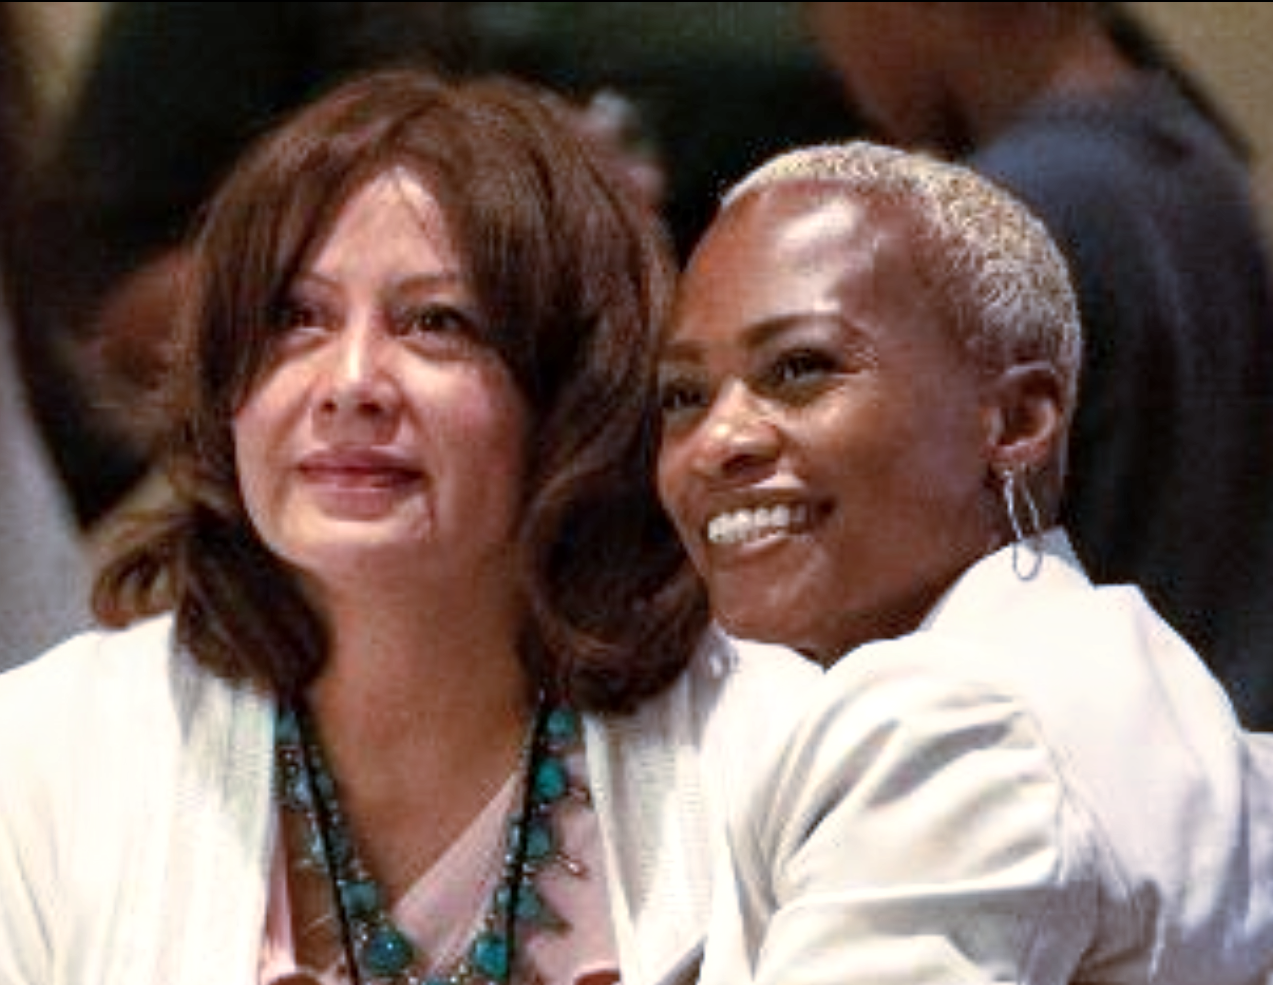 Pamela Foster, left, is shown with Chyrl Jones, Deputy Administrator for the U.S. Department of Justice's Office of Juvenile Justice and Delinquency Prevention (OJJDP).